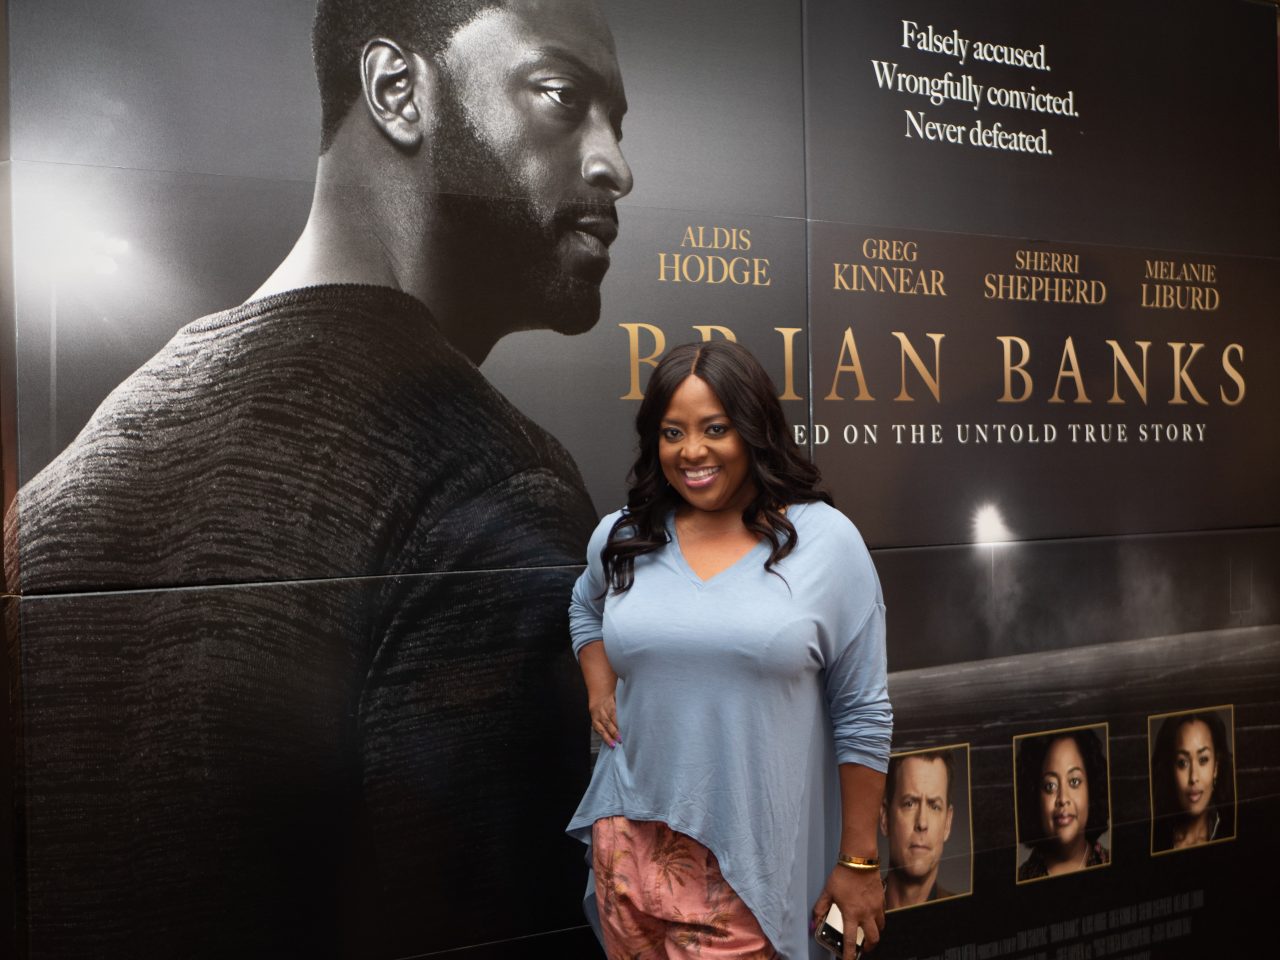 Brian Banks Movie Event Hosted By Sherri Shepherd (Photo Credit: PICTURE PERFECT PHOTOGRAPHY)